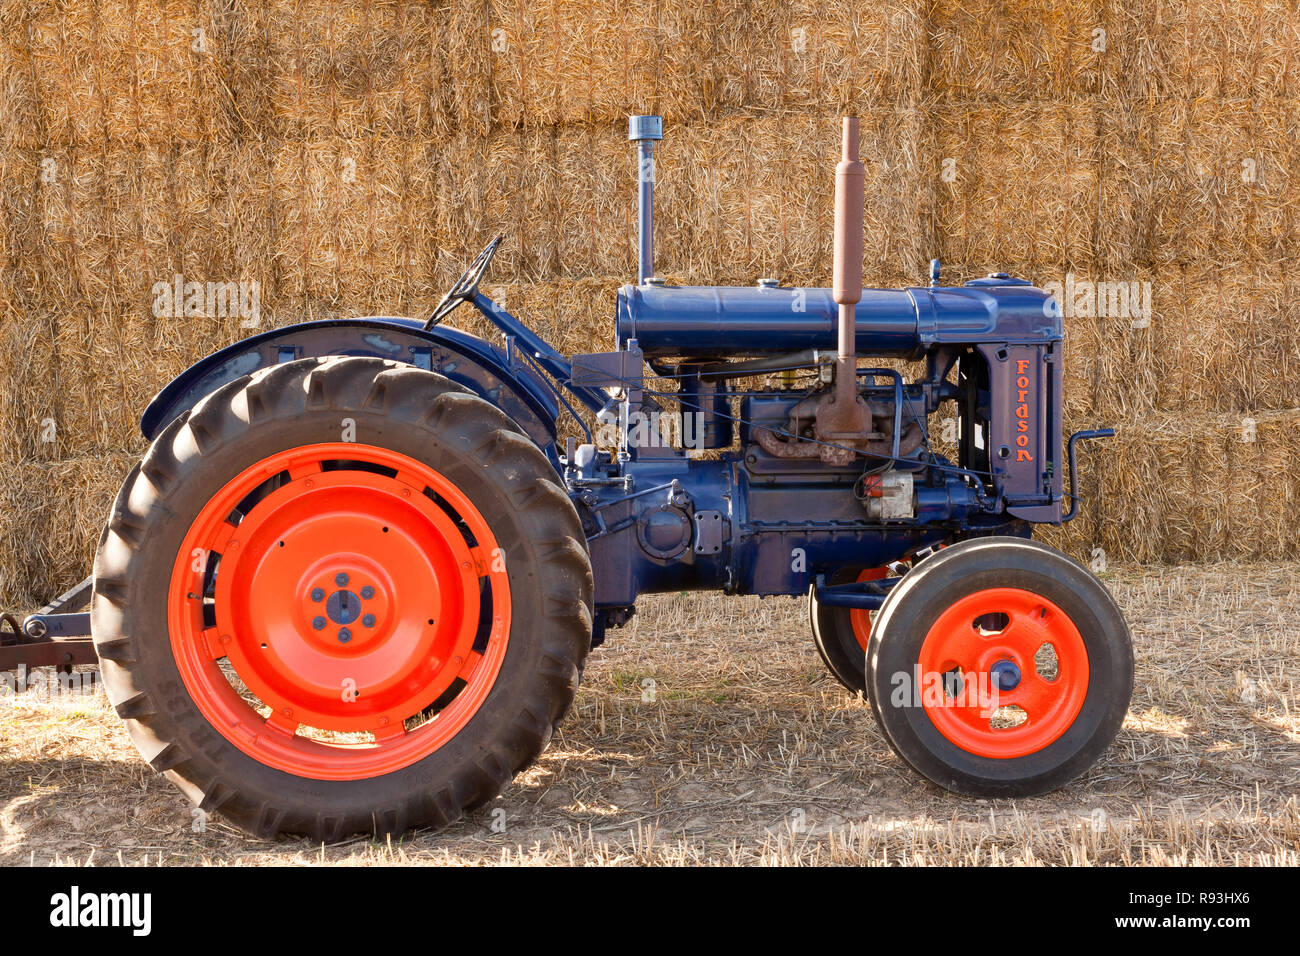 A vintage Fordson tractor Stock Photo